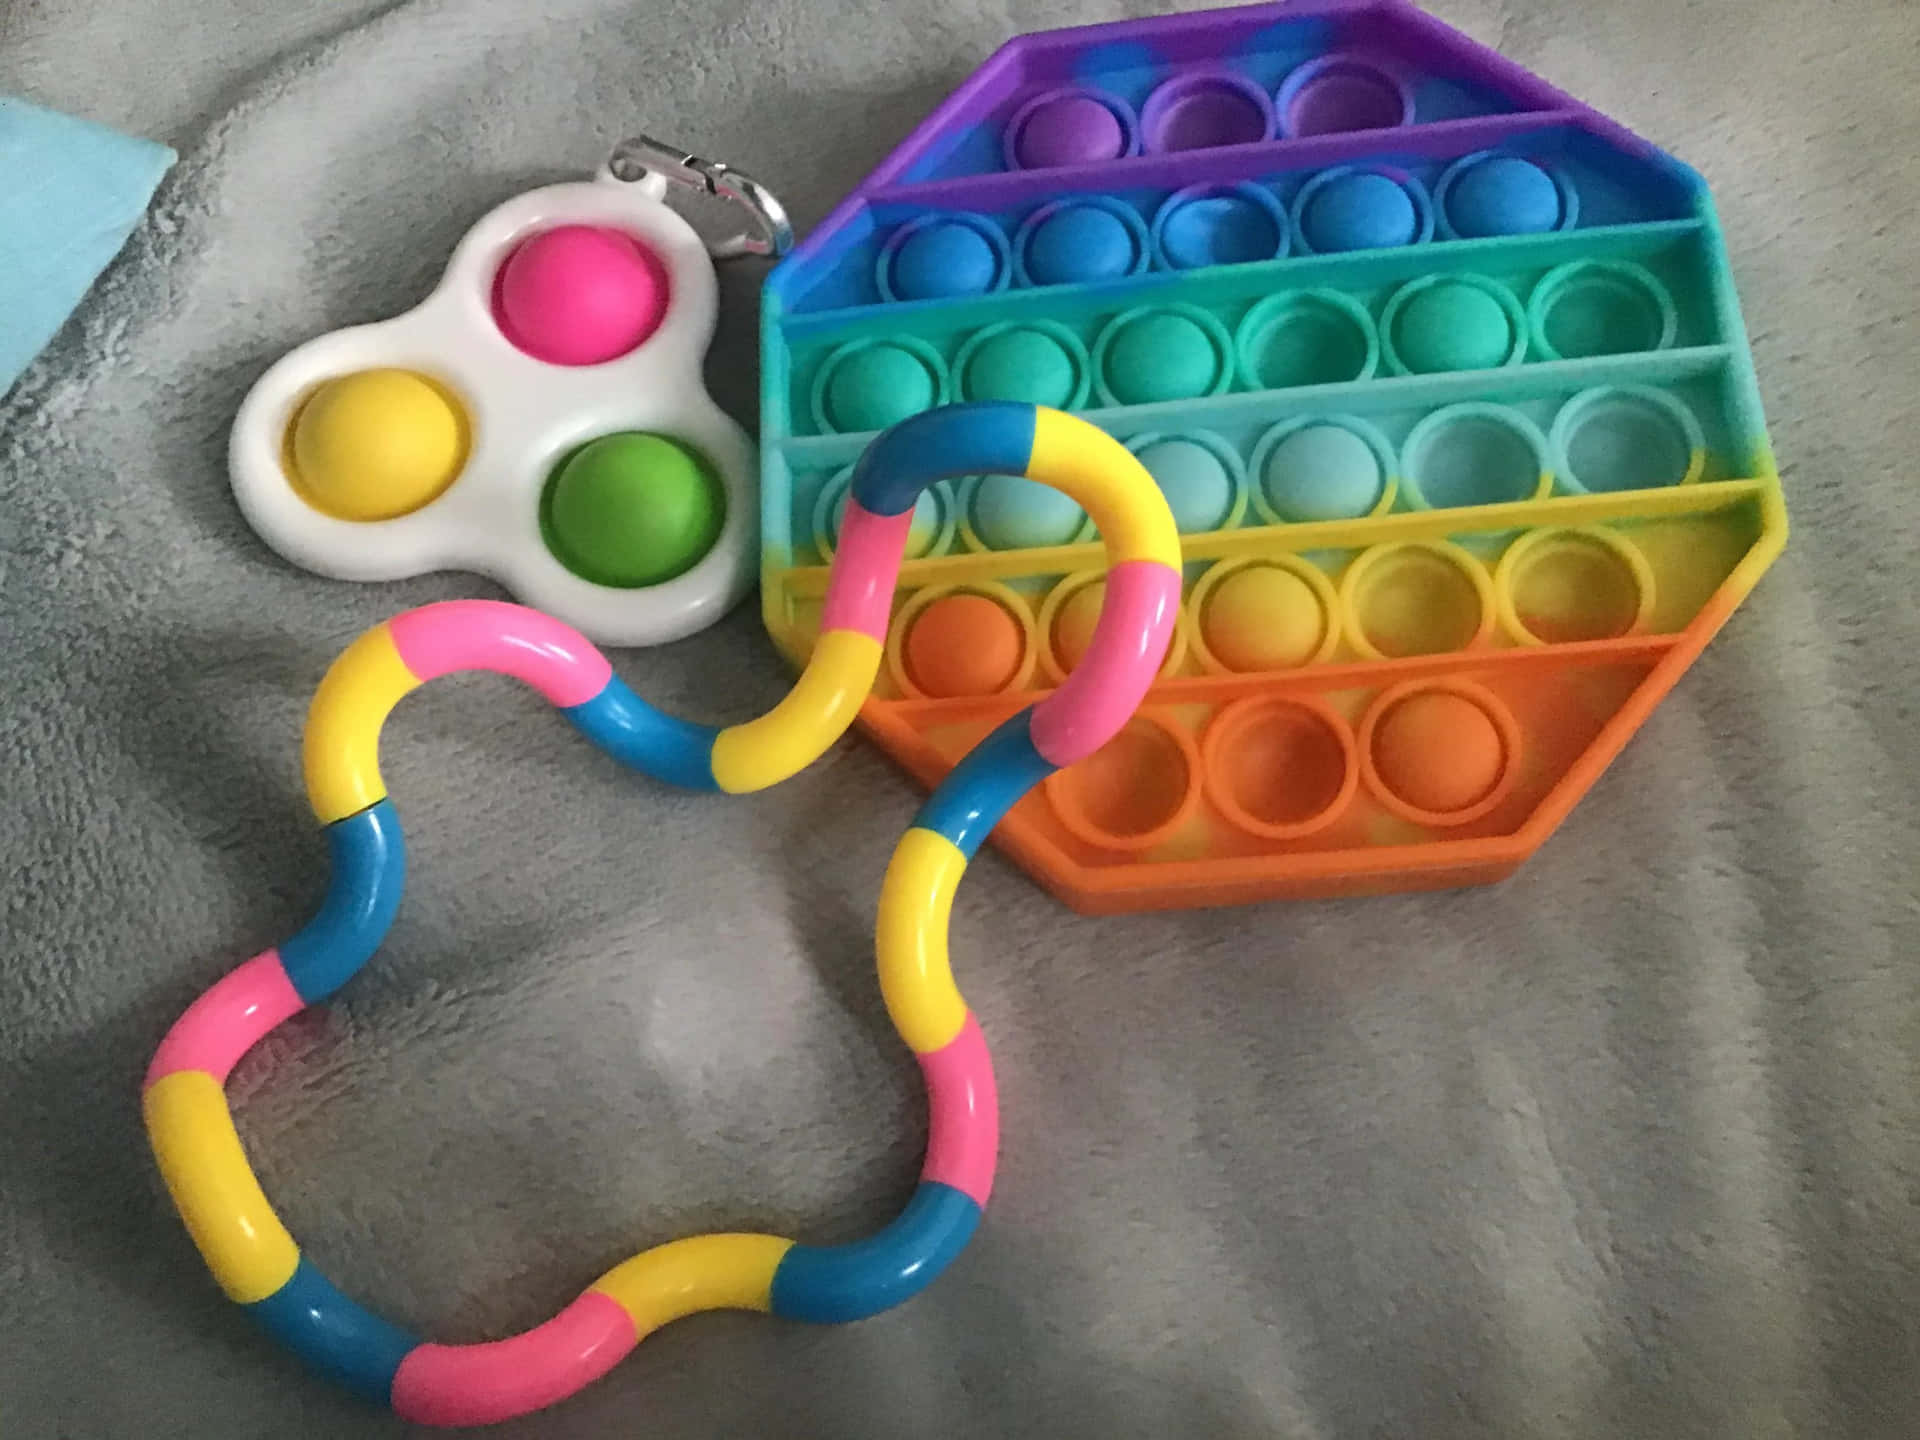 A Colorful Toy With A Colorful Ring And A Toy